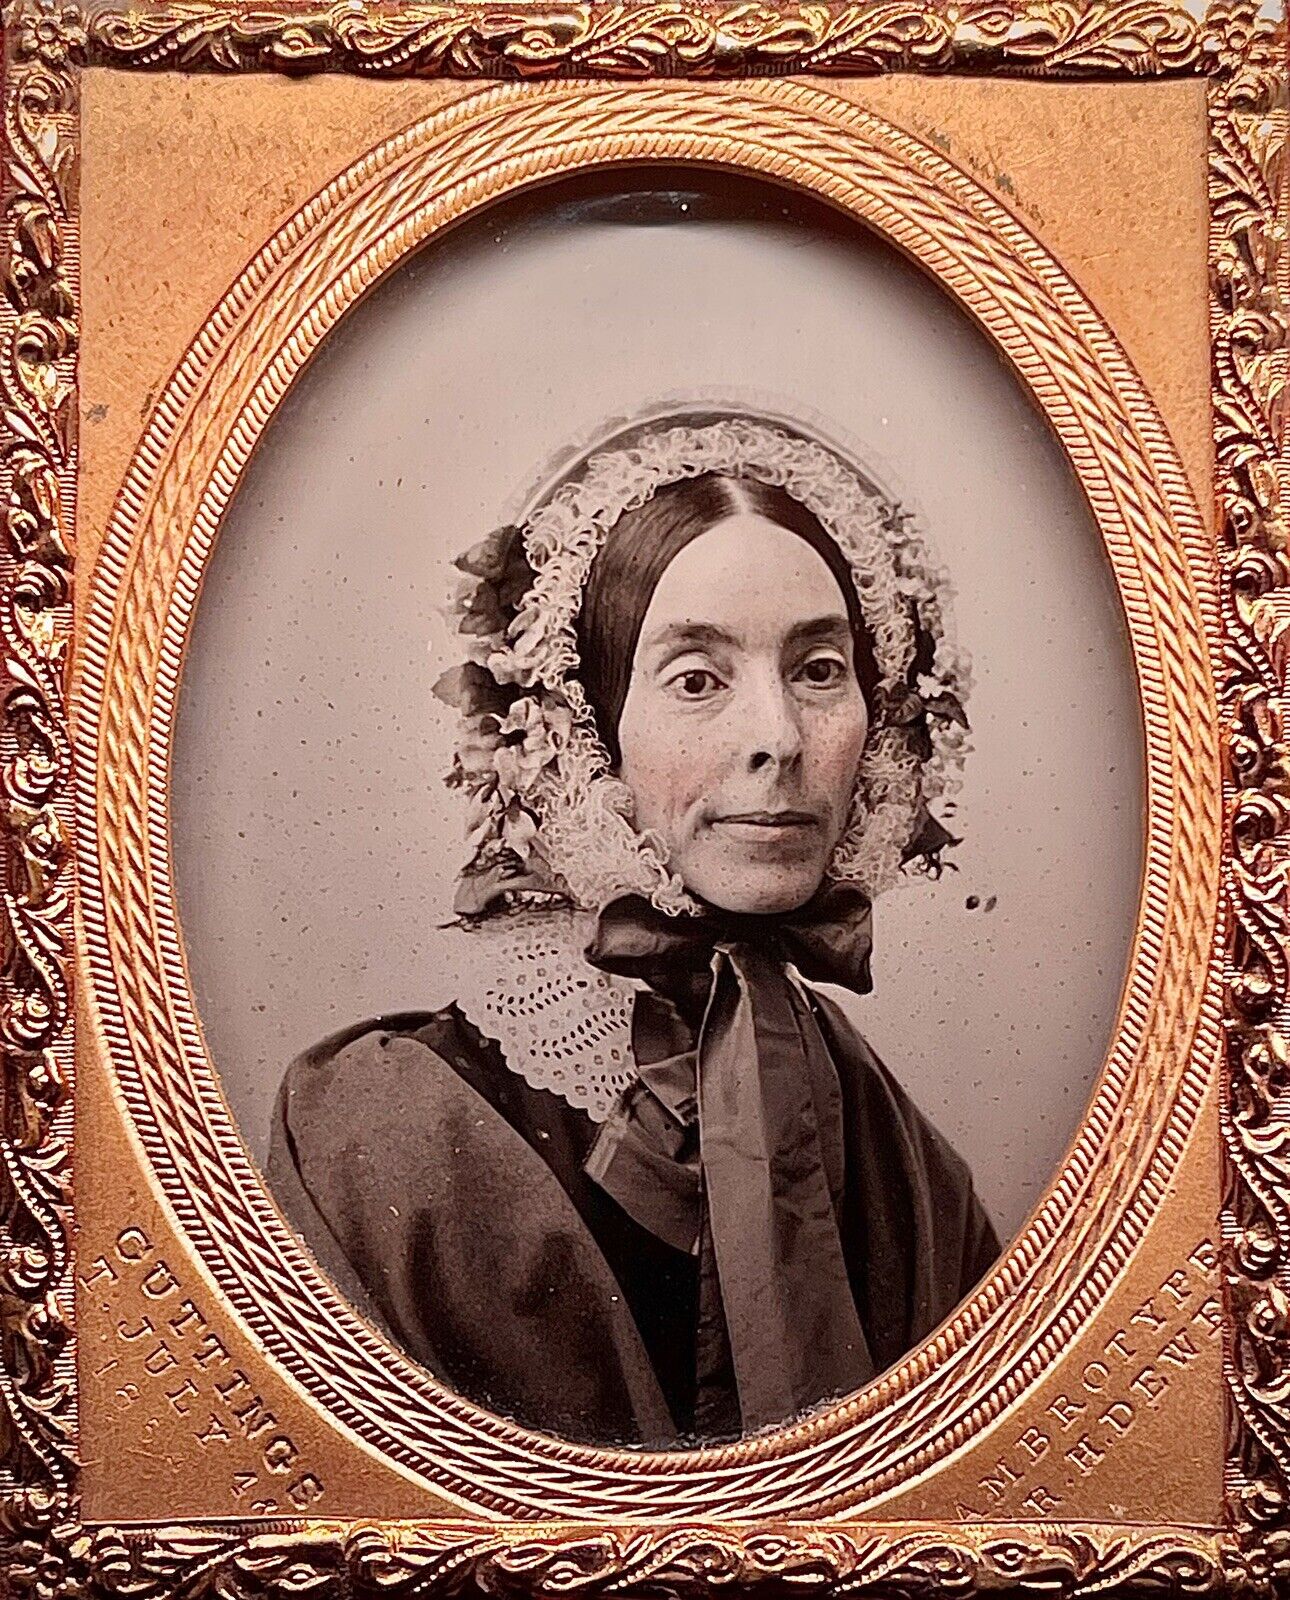 CASED 1/9 PLATE AMBROTYPE BY DEWEY PITTSFIELD, MASS - WOMAN IN HER ORNATE BONNET